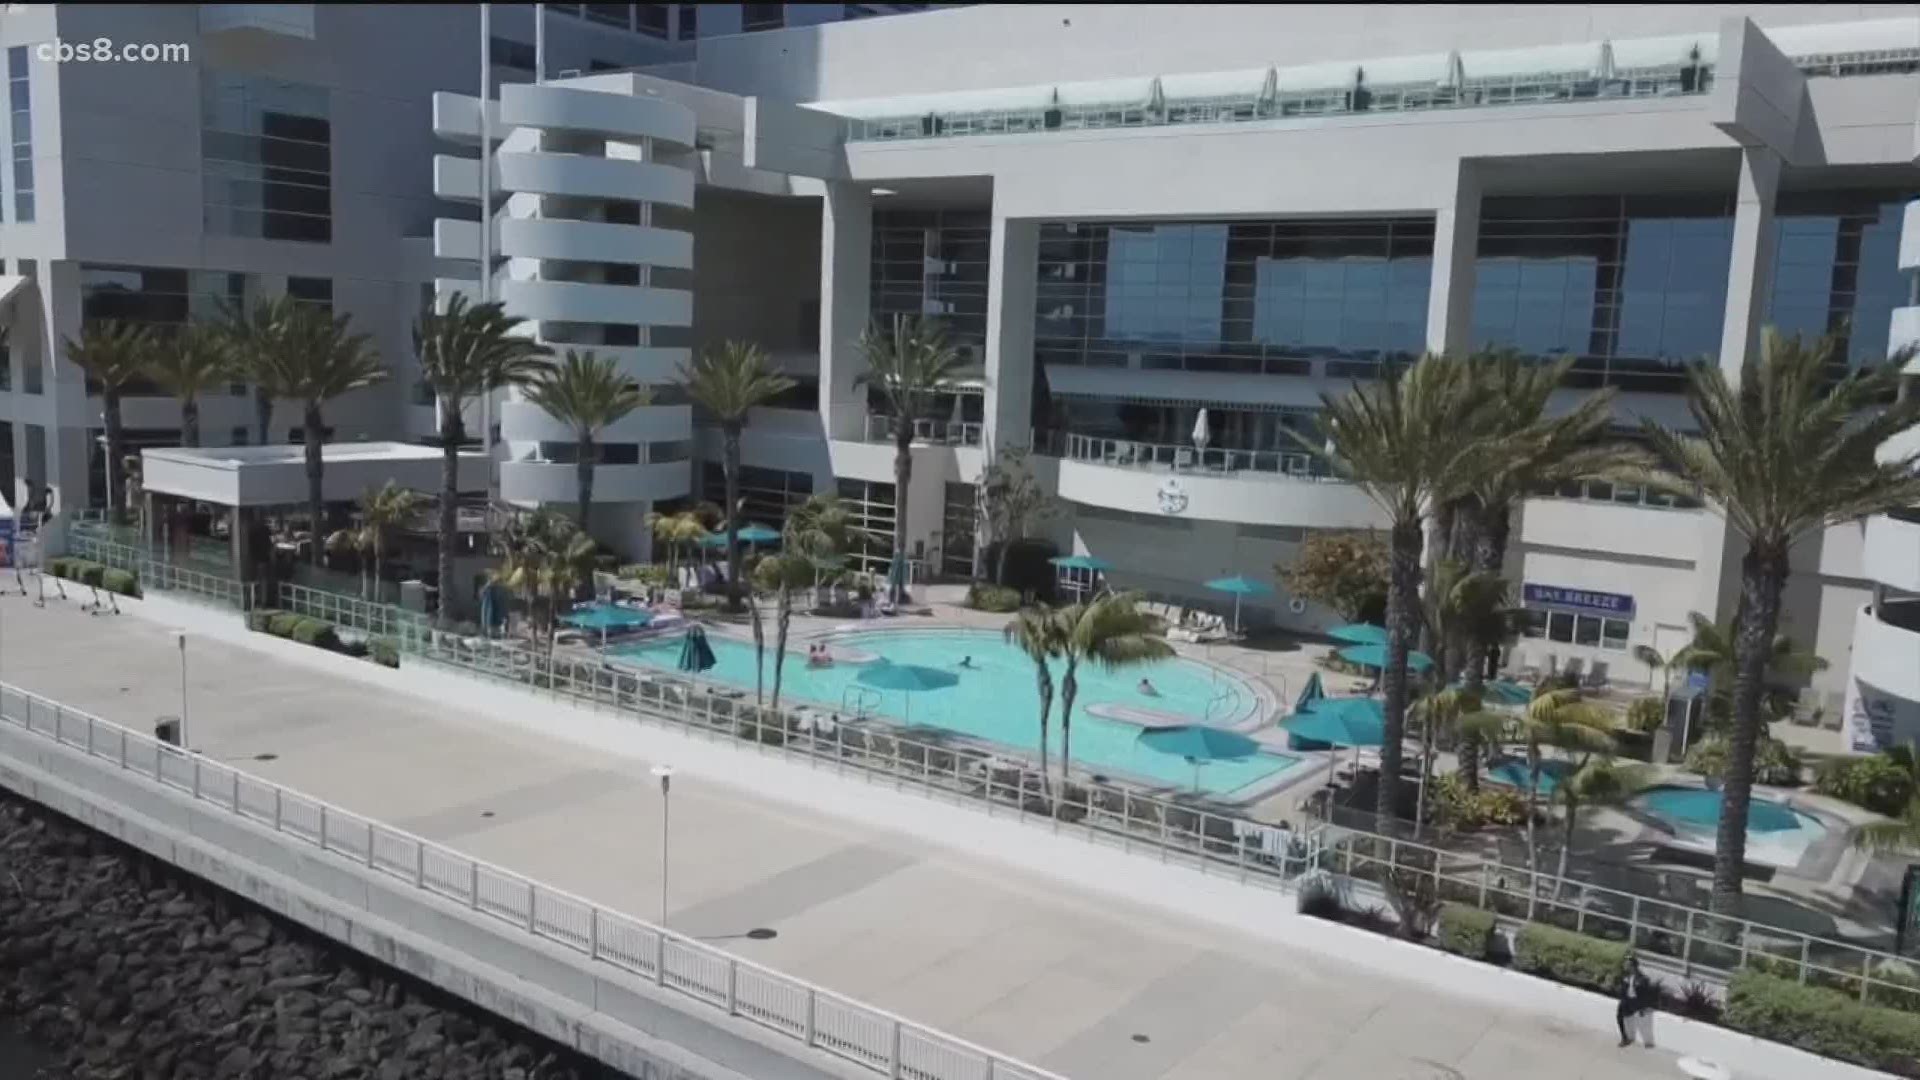 As more hotels reopen, San Diego Tourism Authority reports San Diego is 3rd for hotel stays.